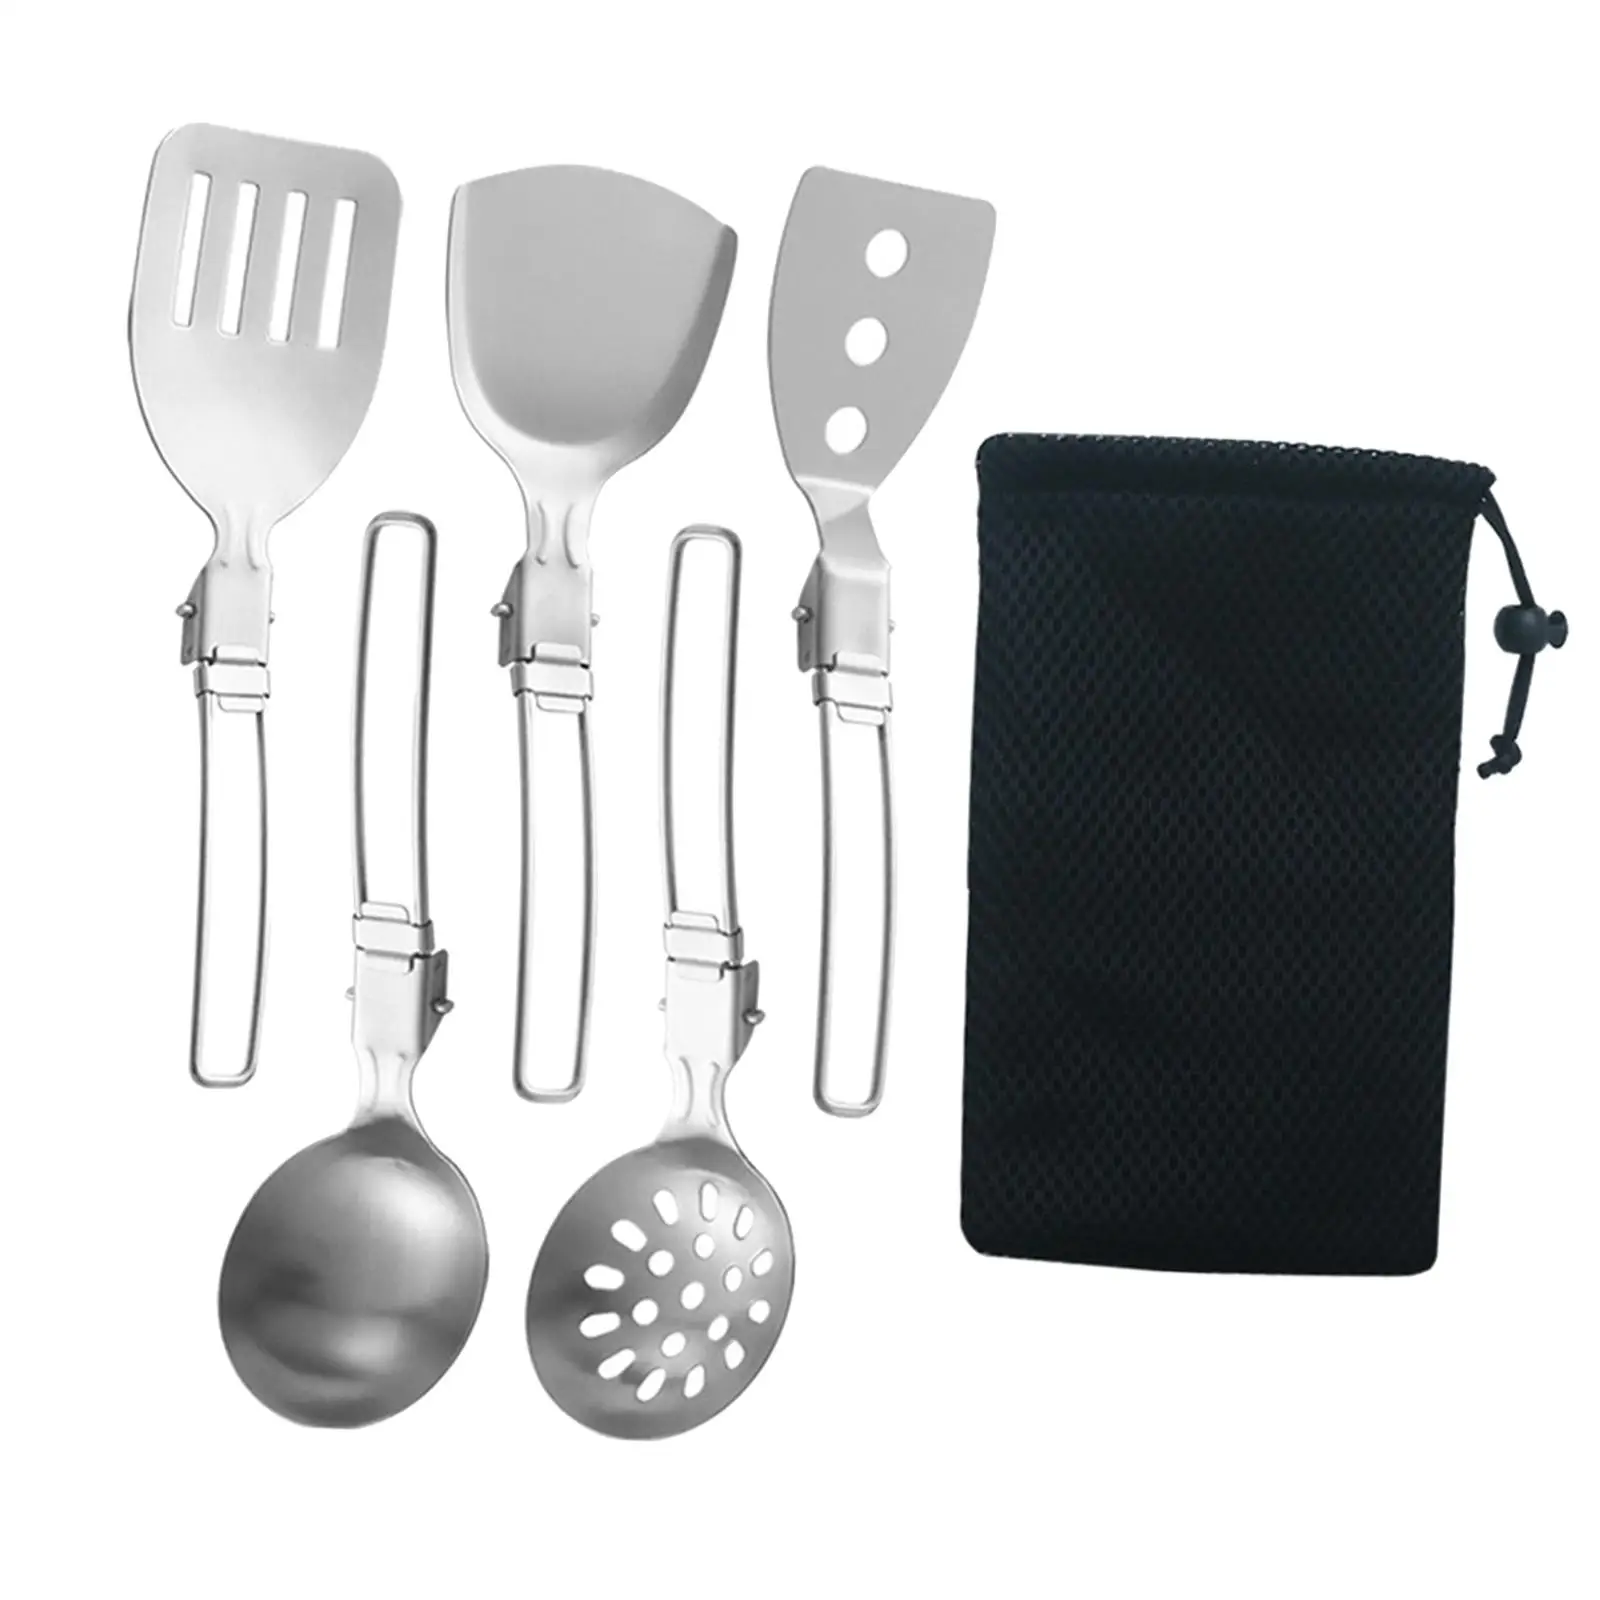 6x Camp Cooking Utensil Set, Cookware Kit ,Cooking and Grilling Outdoor Kitchen